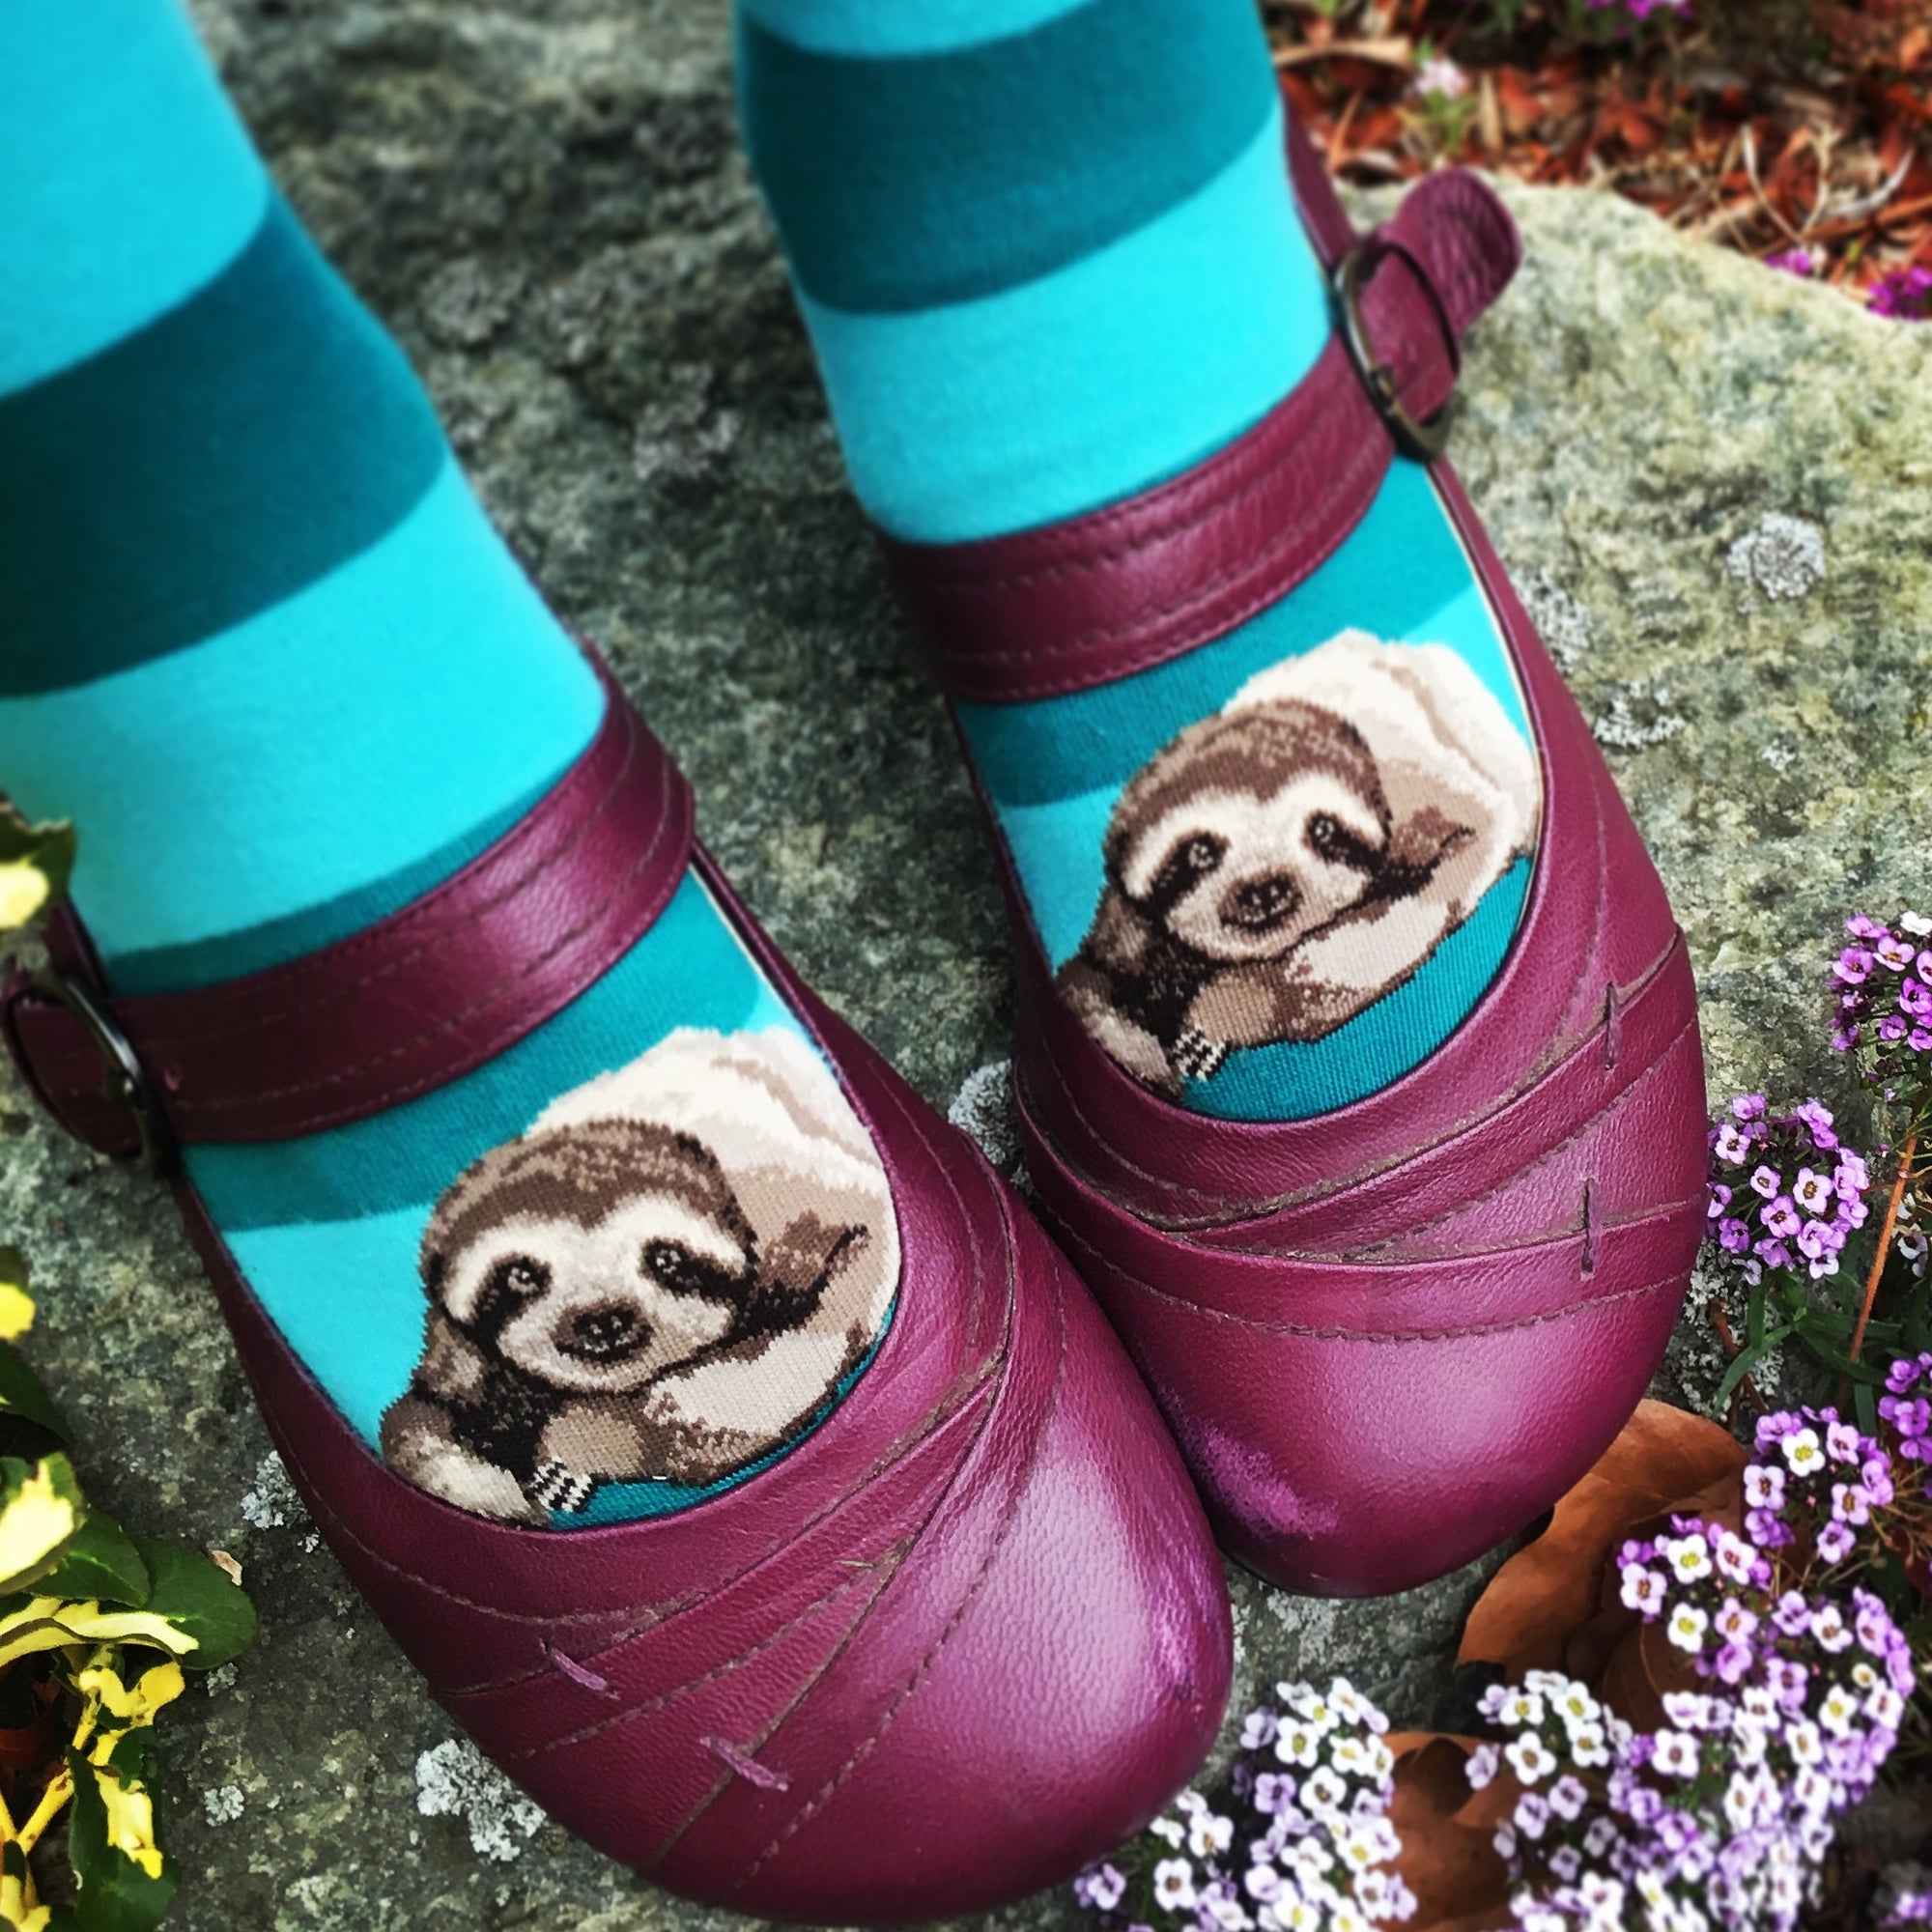 These cute teal striped sloth socks make it look like the sloths are peeking out from her purple Mary Jane shoes.